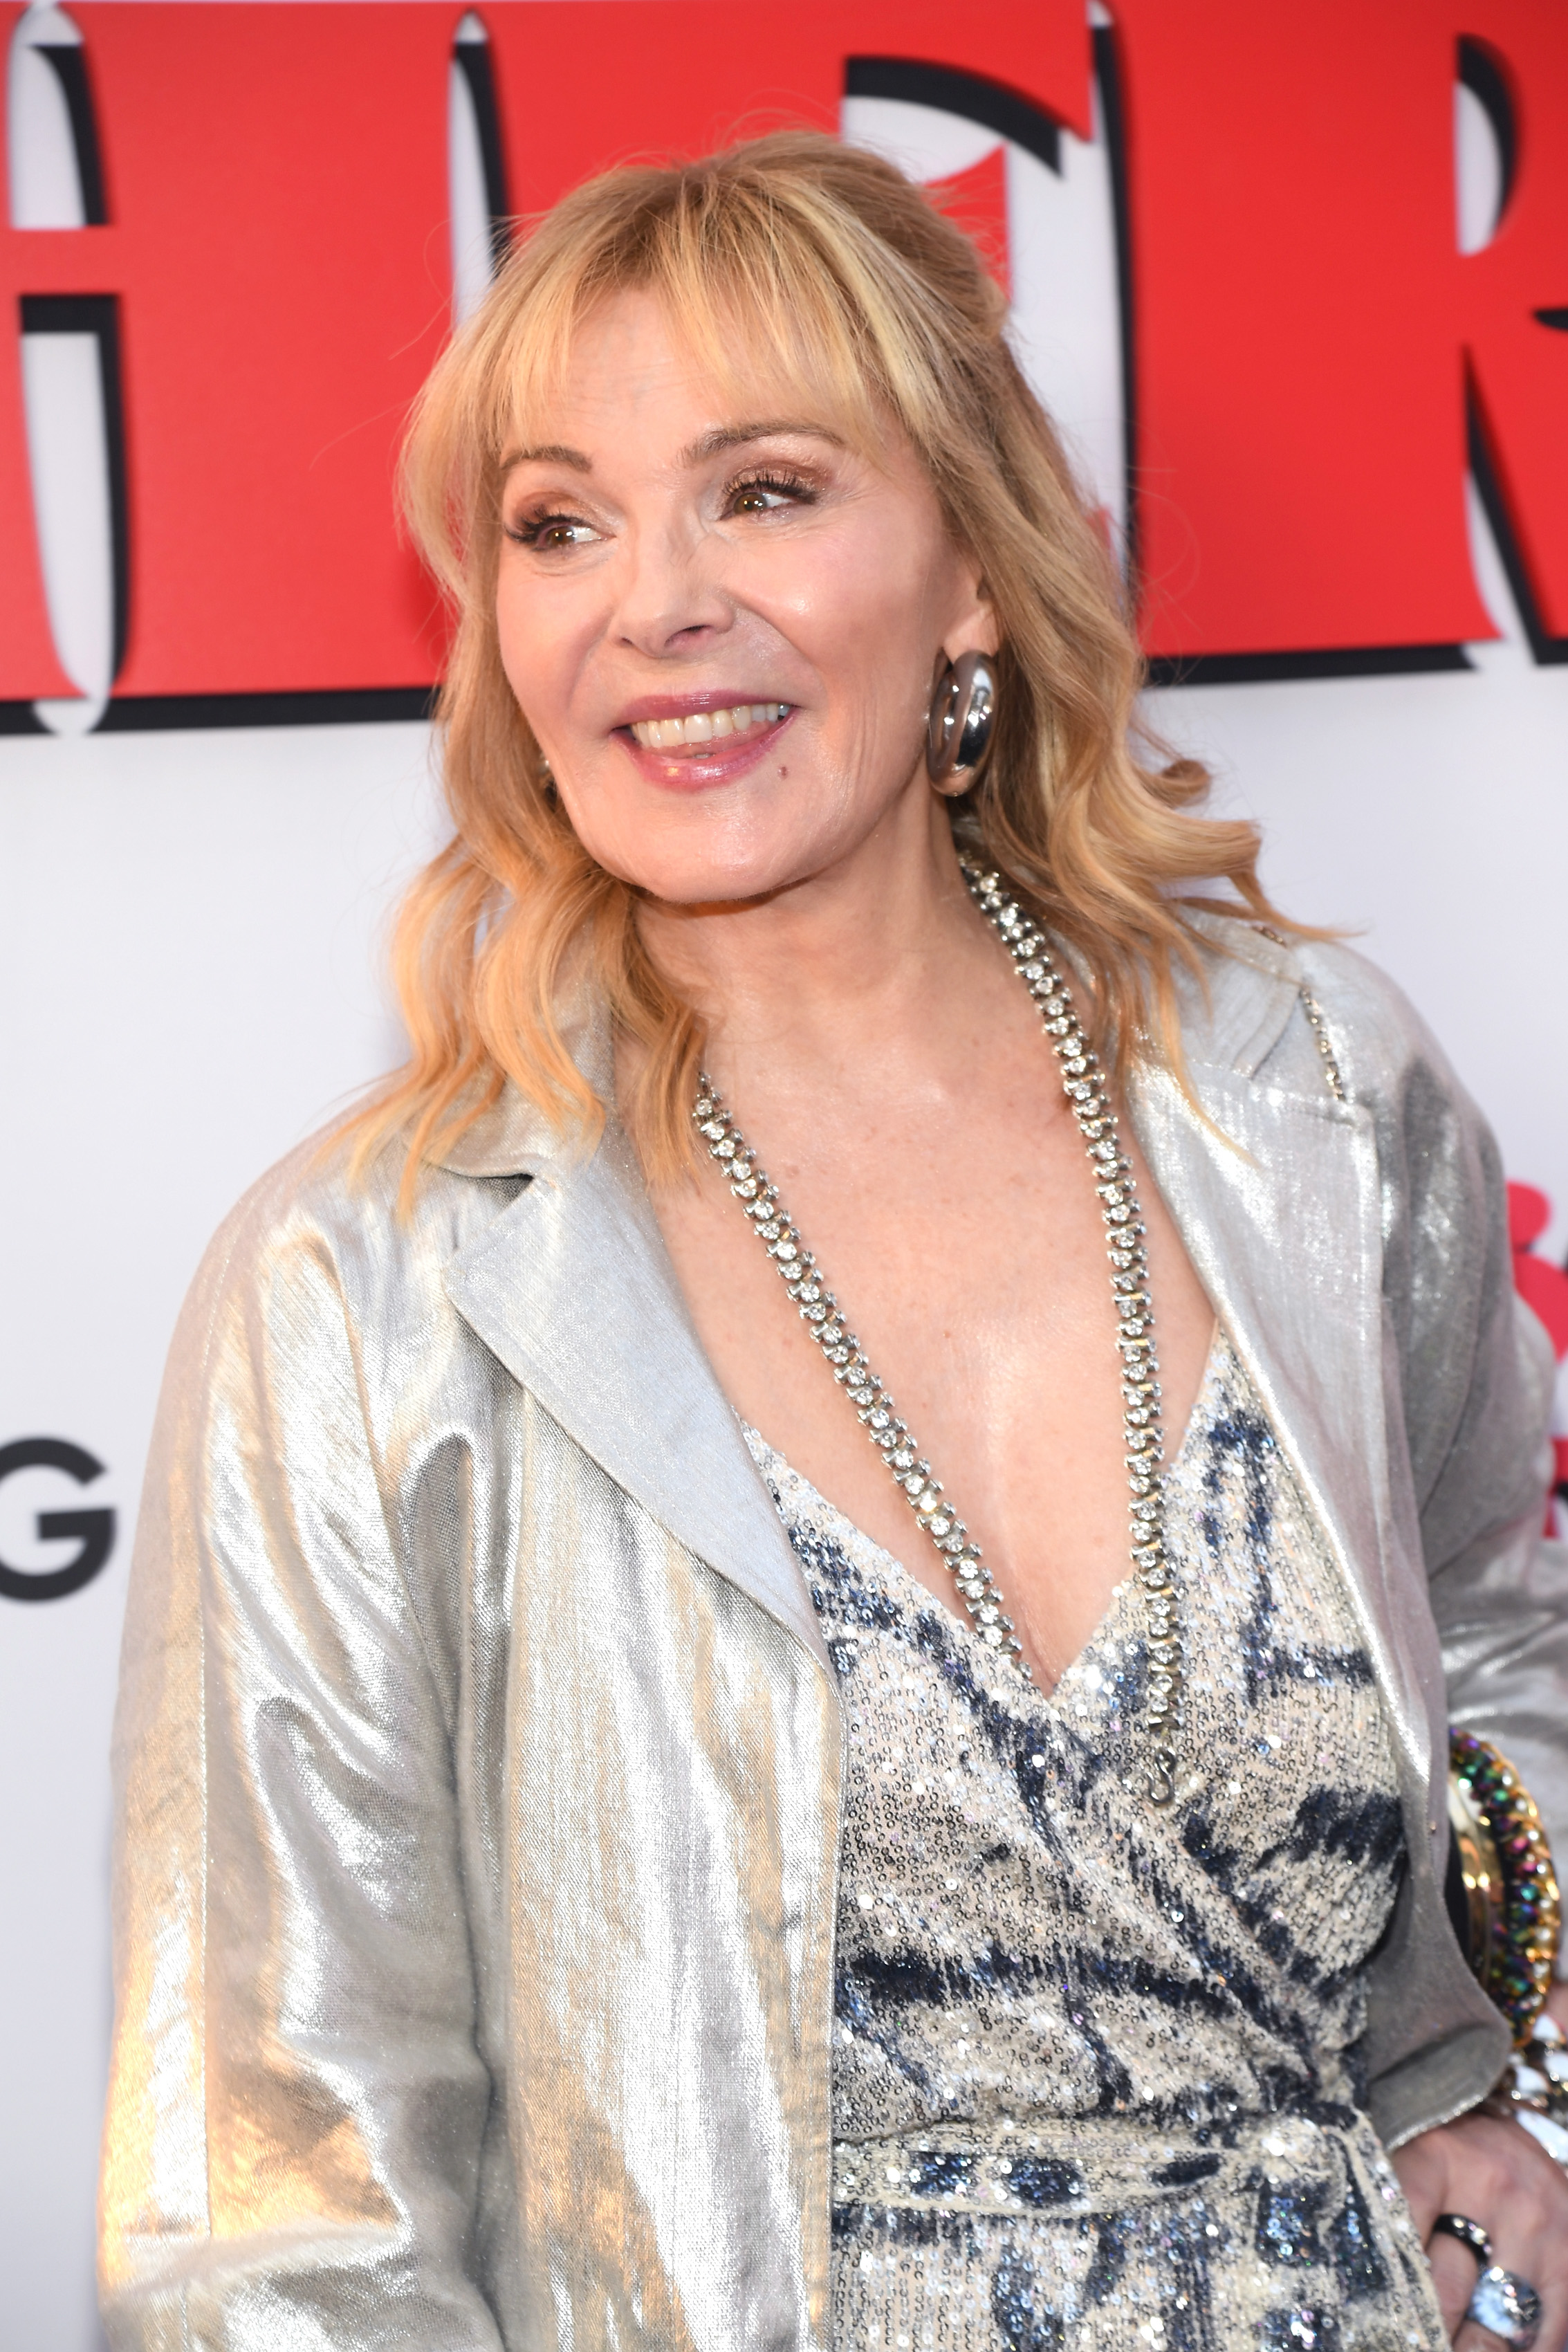 Kim Cattrall at the "About My Father" New York premiere on May 9, 2023, in New York City | Source: Getty Images